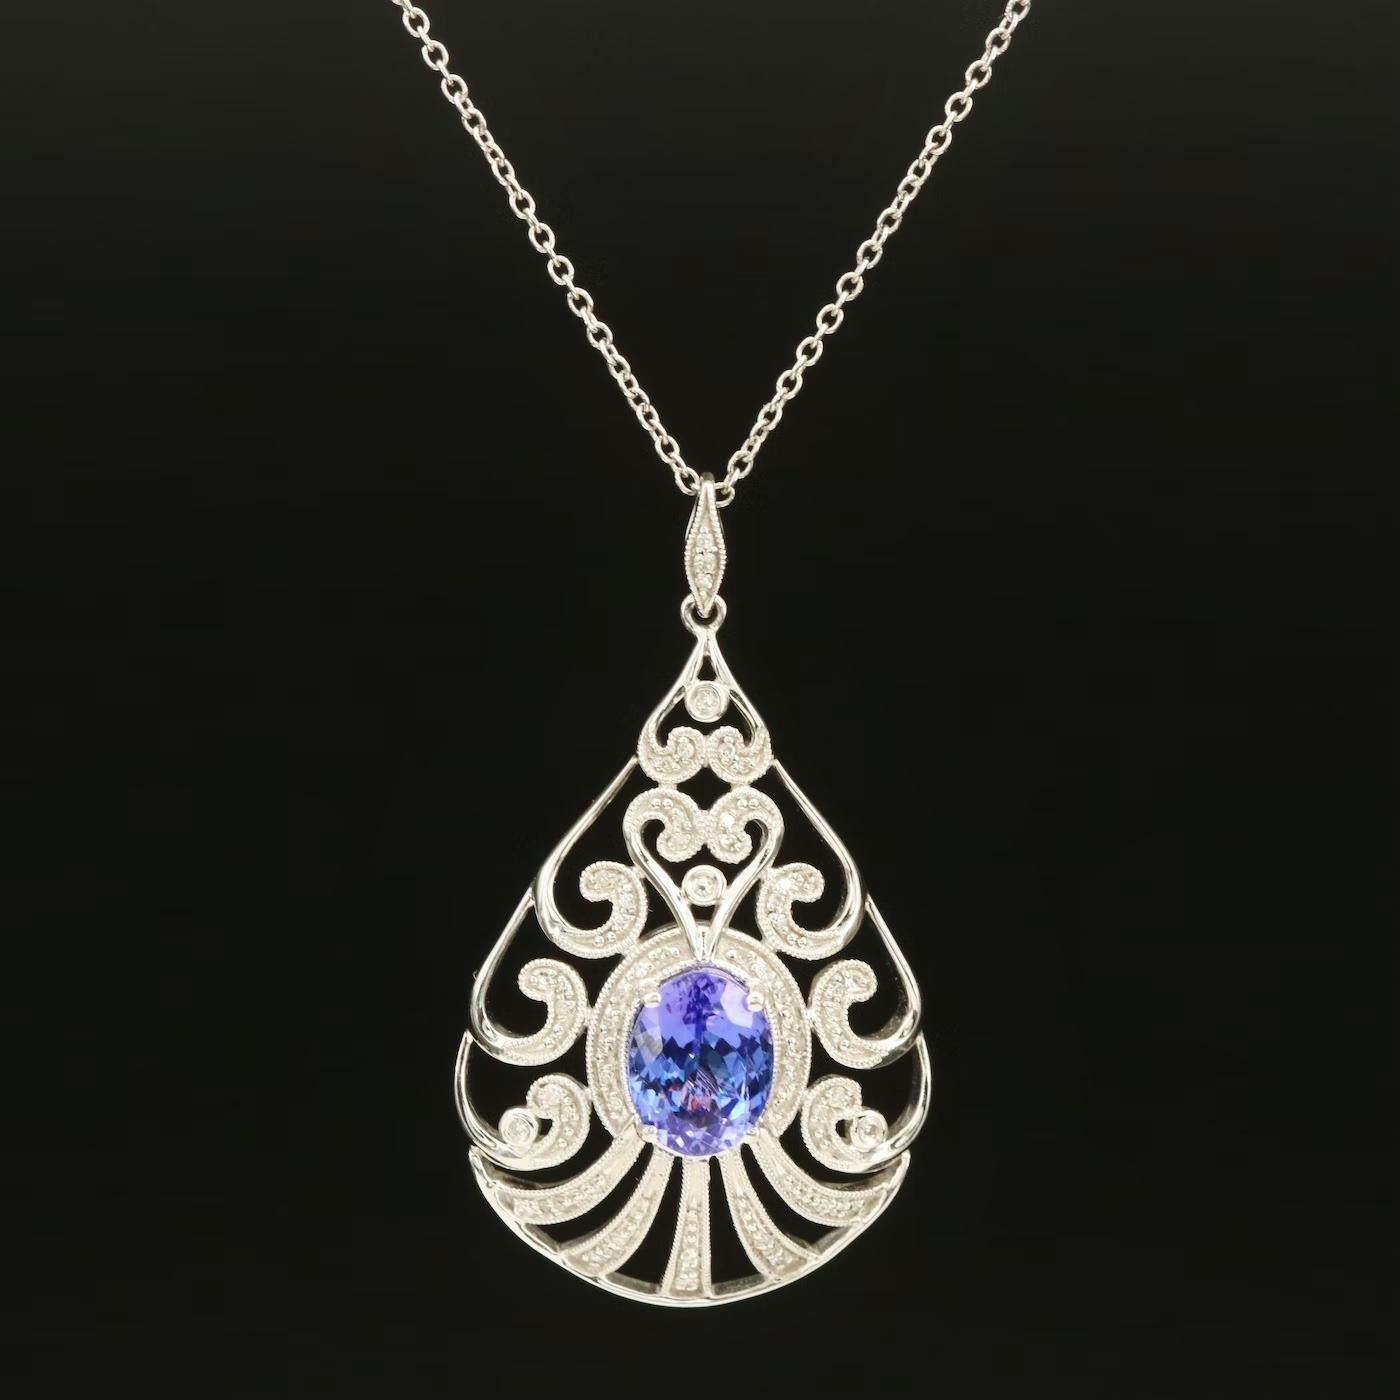 Effy Designer Necklace, stamped and hallmarked

NEW with Tags, Tag price $5750

2.25 CWT Natural Diamond & Natural Tanzanite, TOP QUALITY 

14K Gold, stamped 14K

1.5 Inch in drop length

Comes with gift box